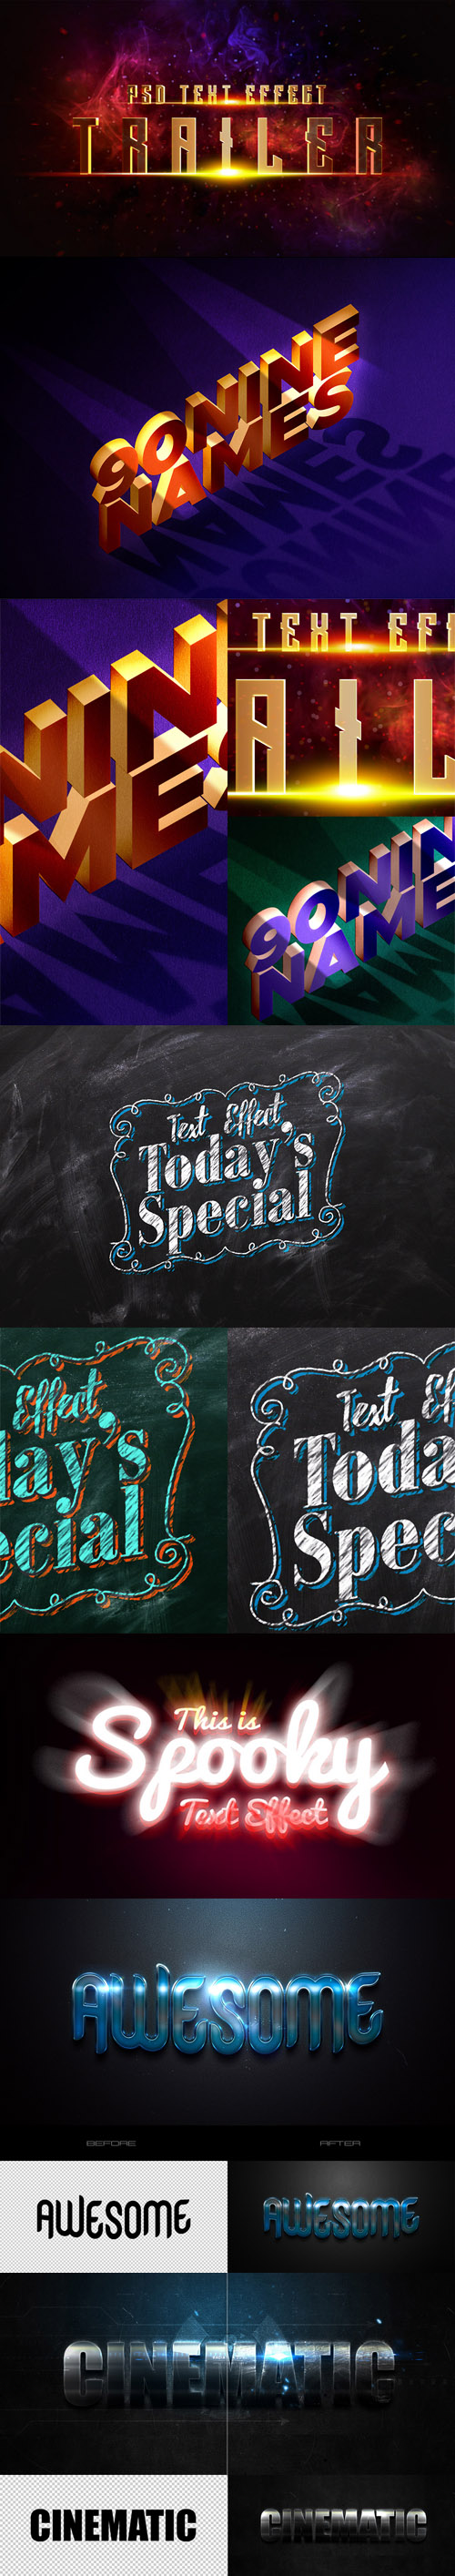 6 Awesome Text Effects & Styles for Photoshop